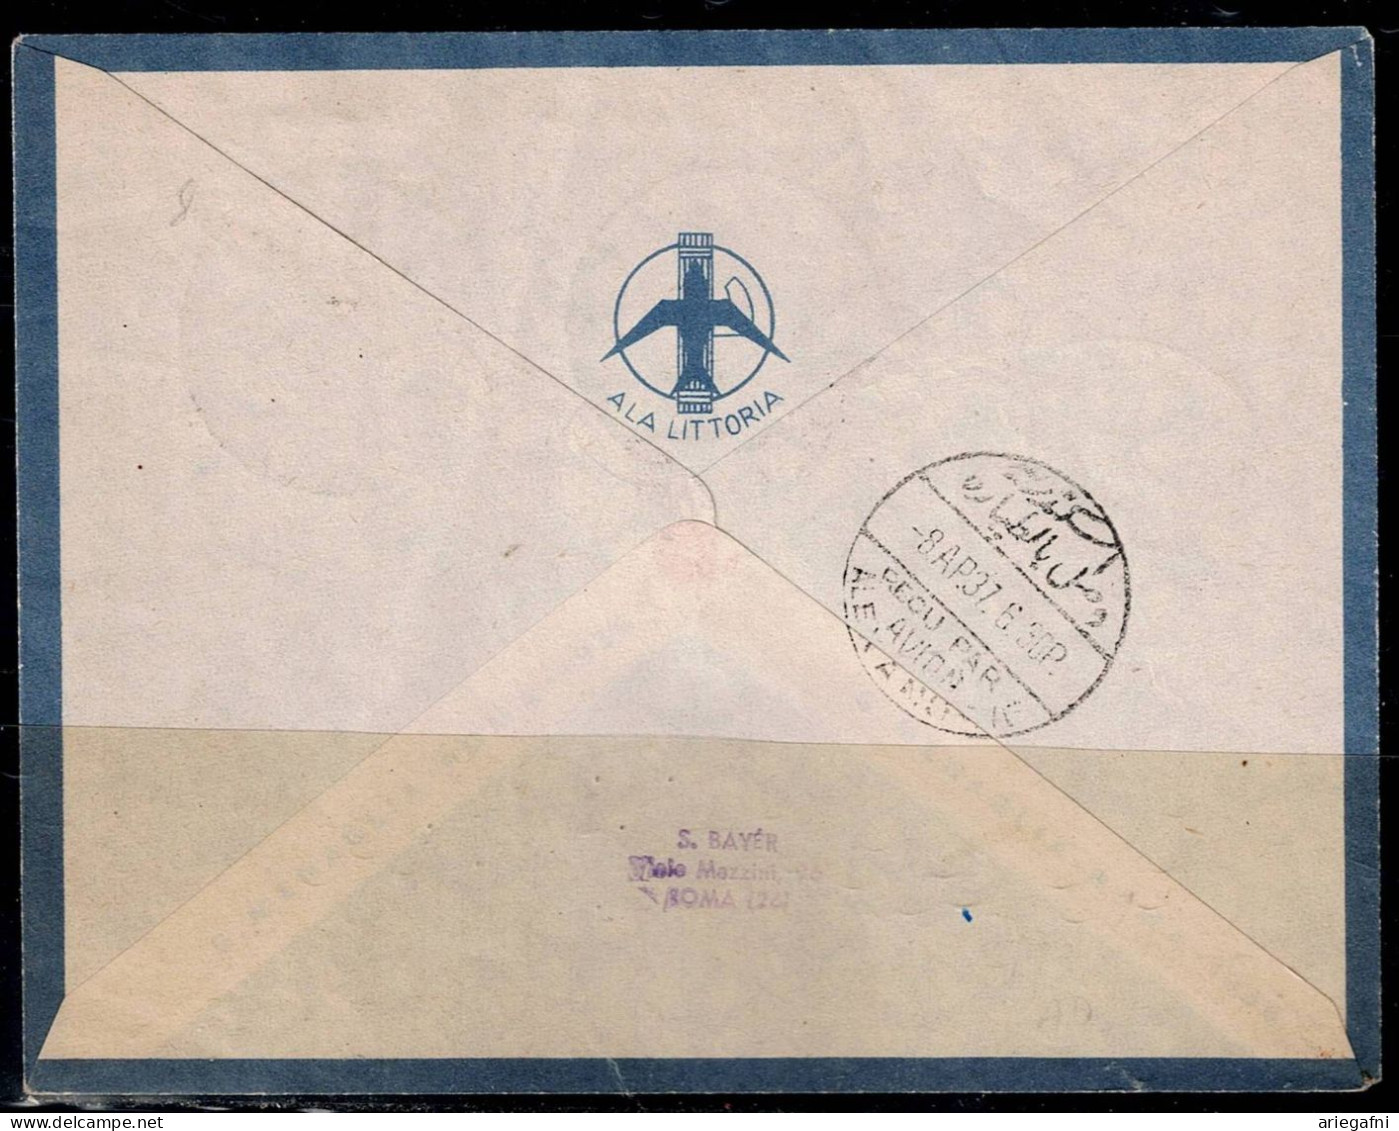 ISRAEL 1937 COVER FLYING BY AIR MAIL IN7/4/37 FROM ROMA VIA HAIFA TO ALESSANDRIA VF!! - Airmail